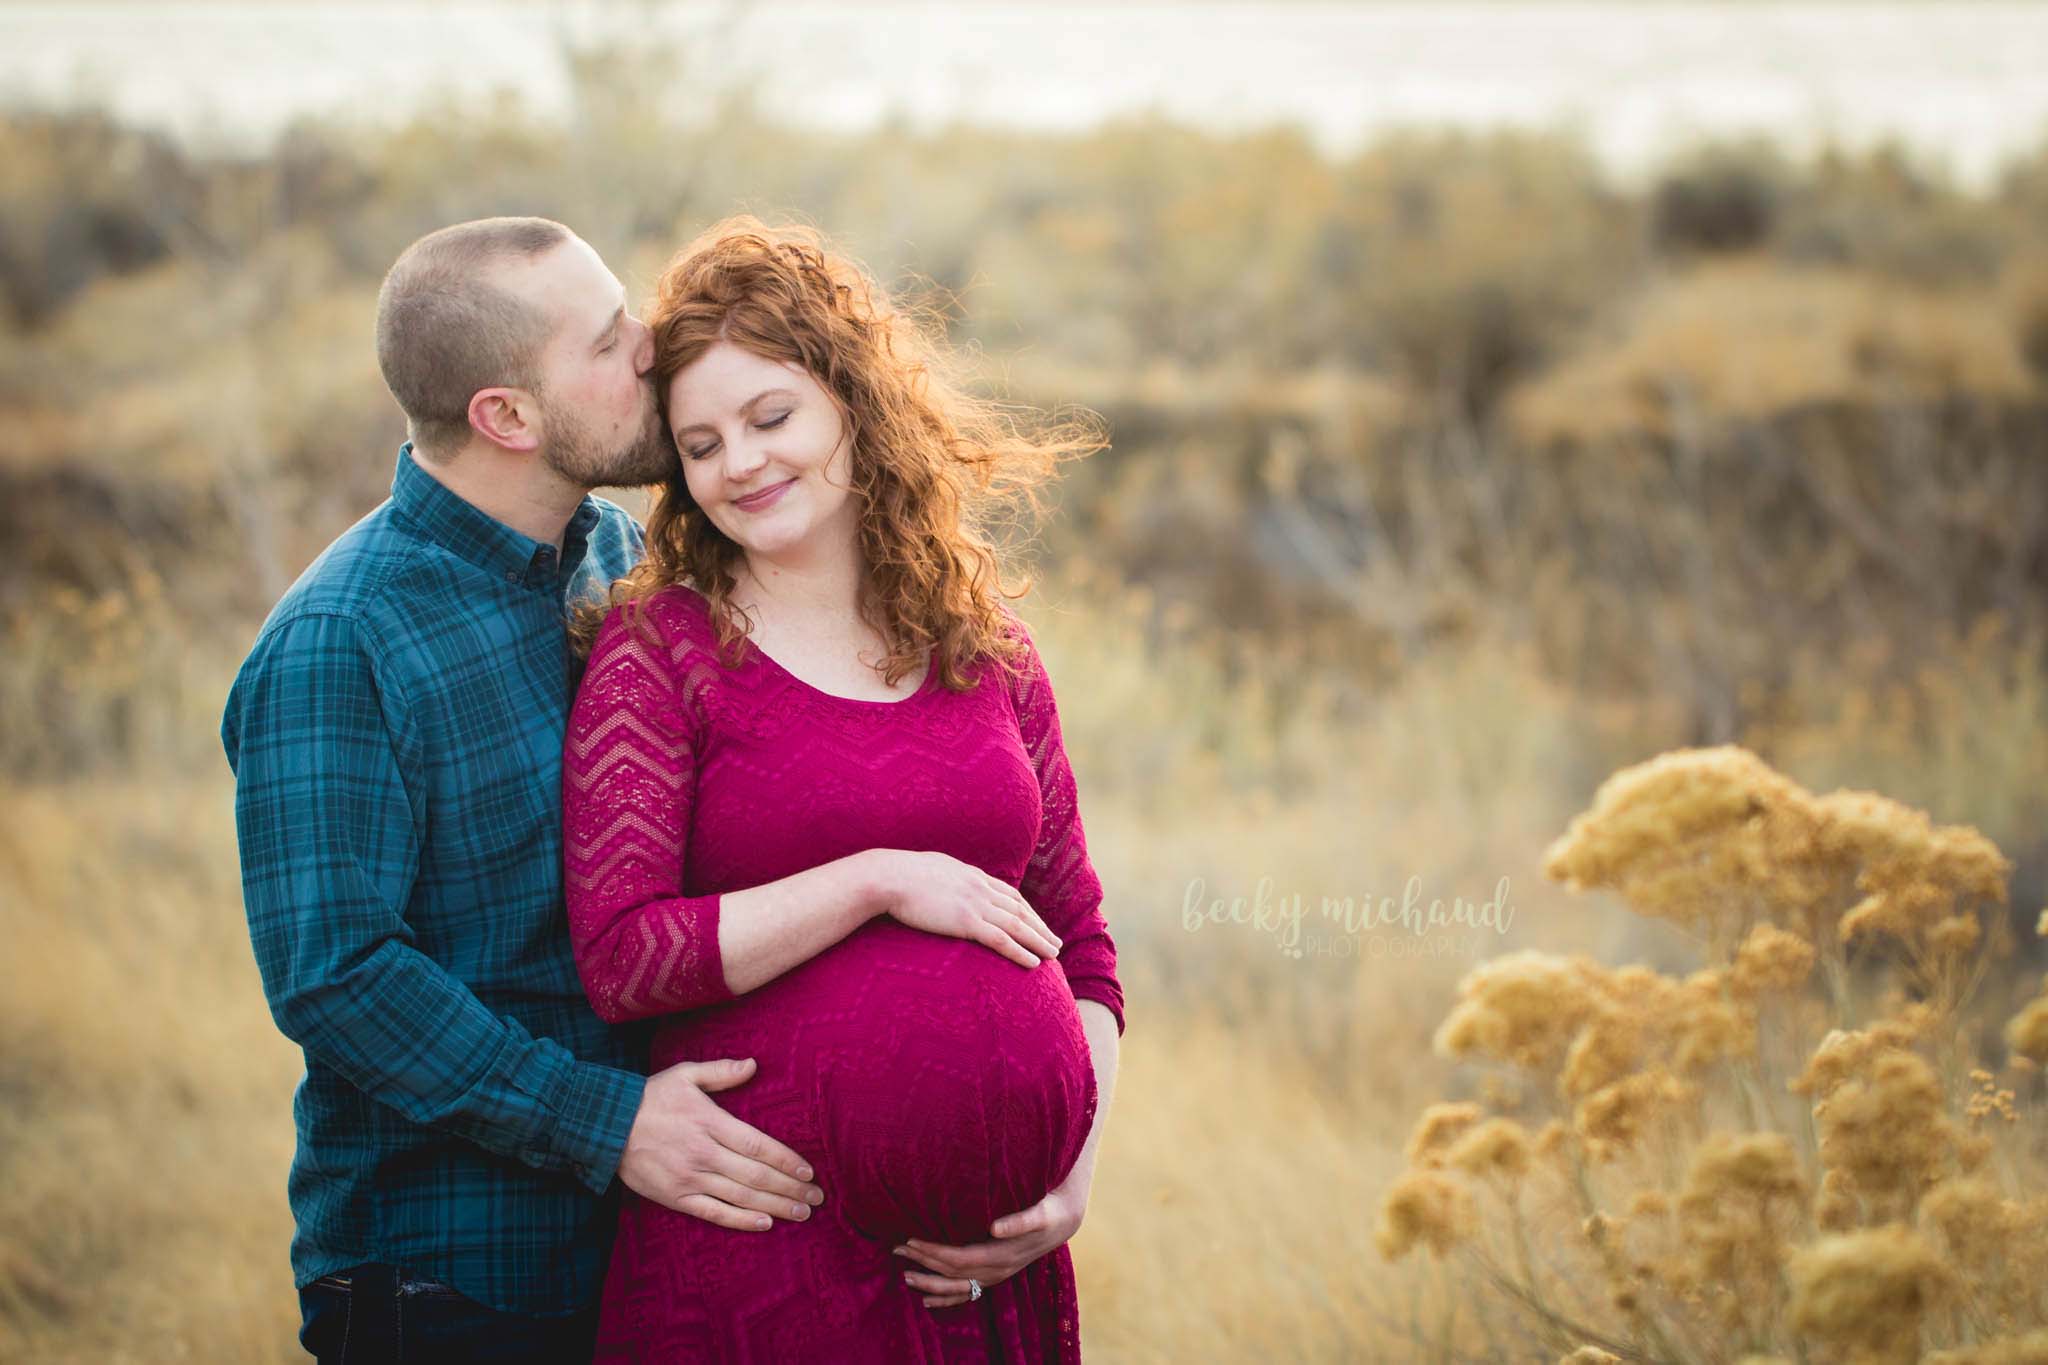 A husband kisses his wife's head during their maternity photo shoot